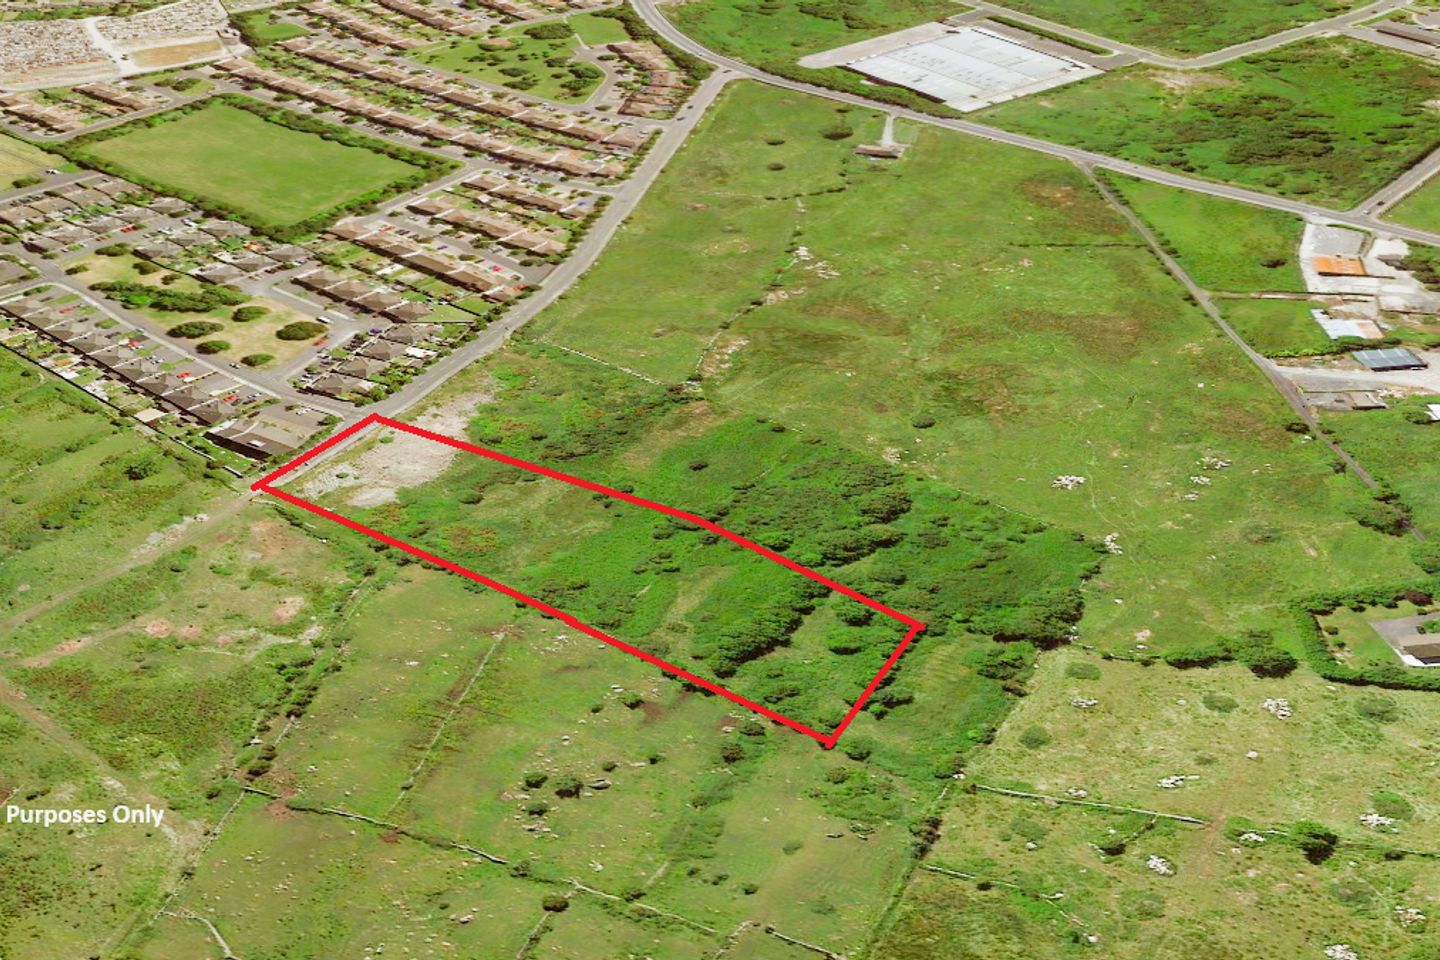 Development Lands at Letteragh, Rahoon, Co. Galway